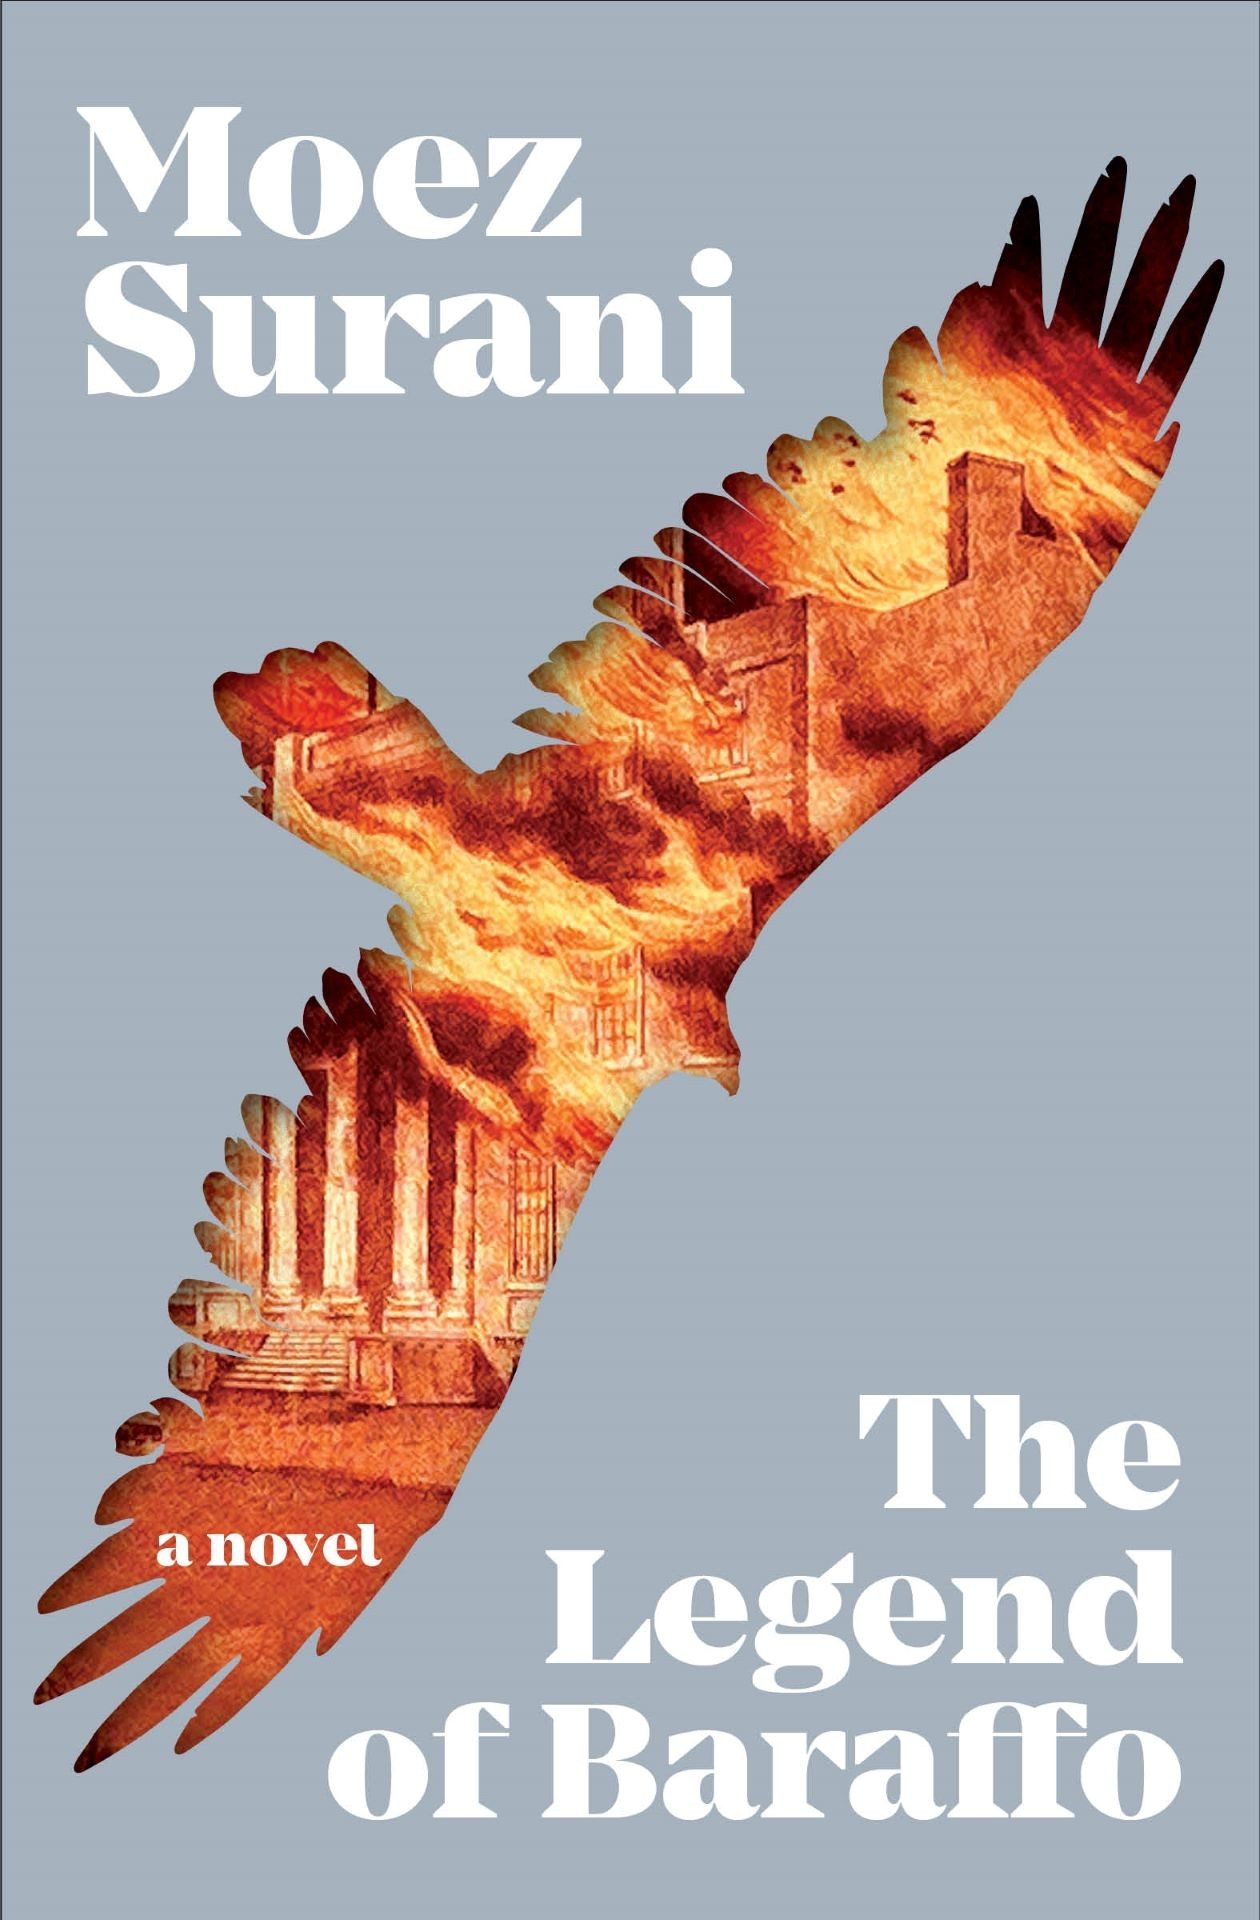 Book cover of 'The Legend of Baraffo' by Moez Surani, featuring an image of a bird composed of architectural elements and flames.